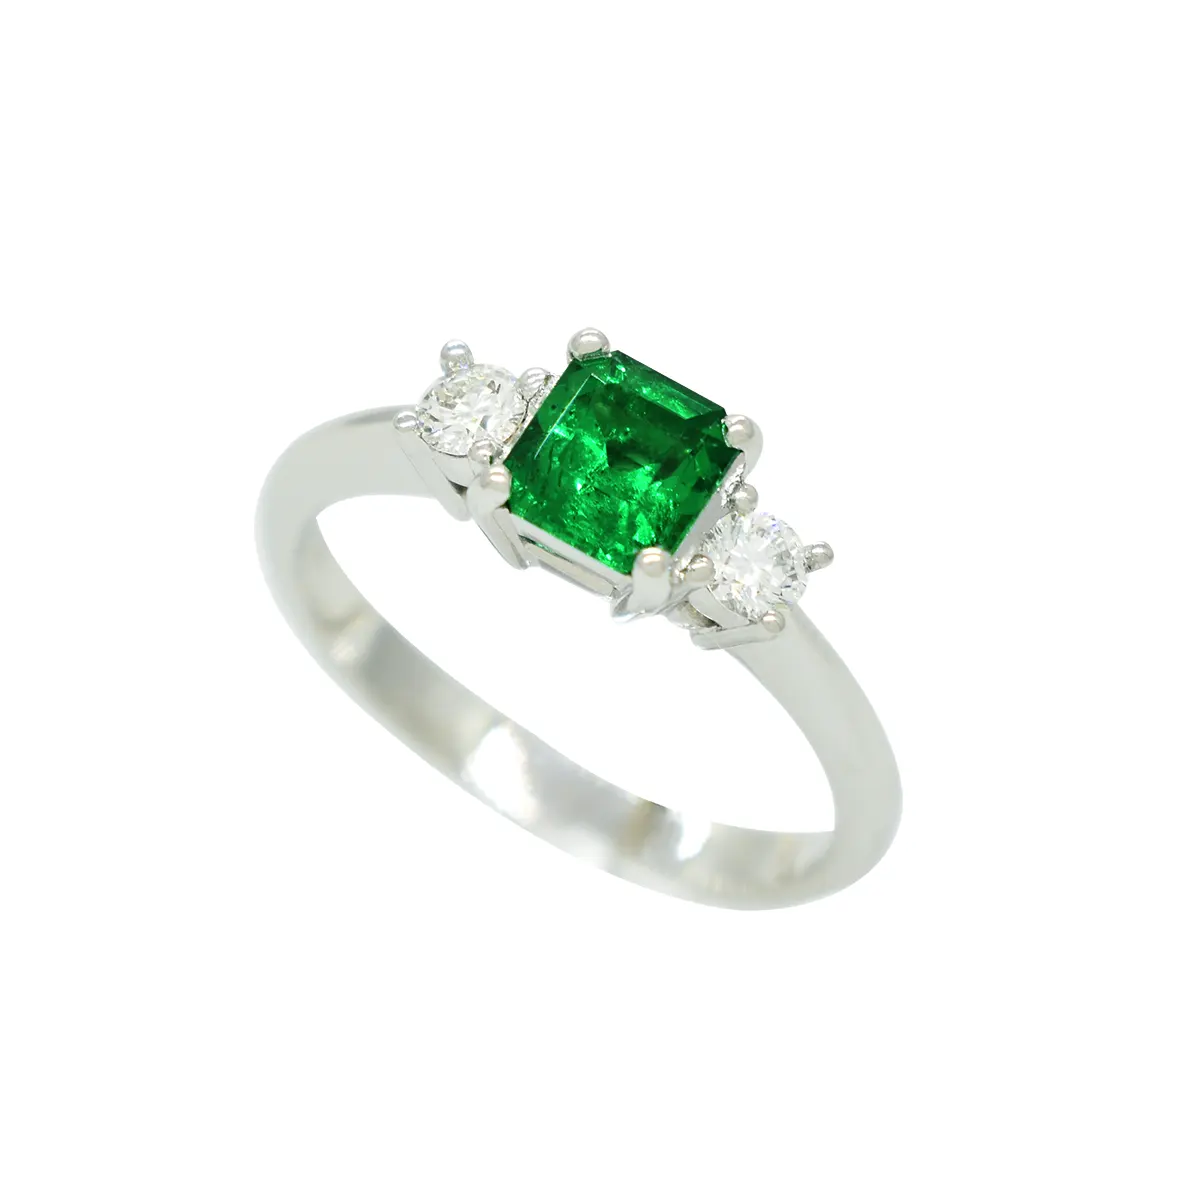 Small Emerald Ring with Round Diamonds in 18K White Gold 3 Stones Ring Style